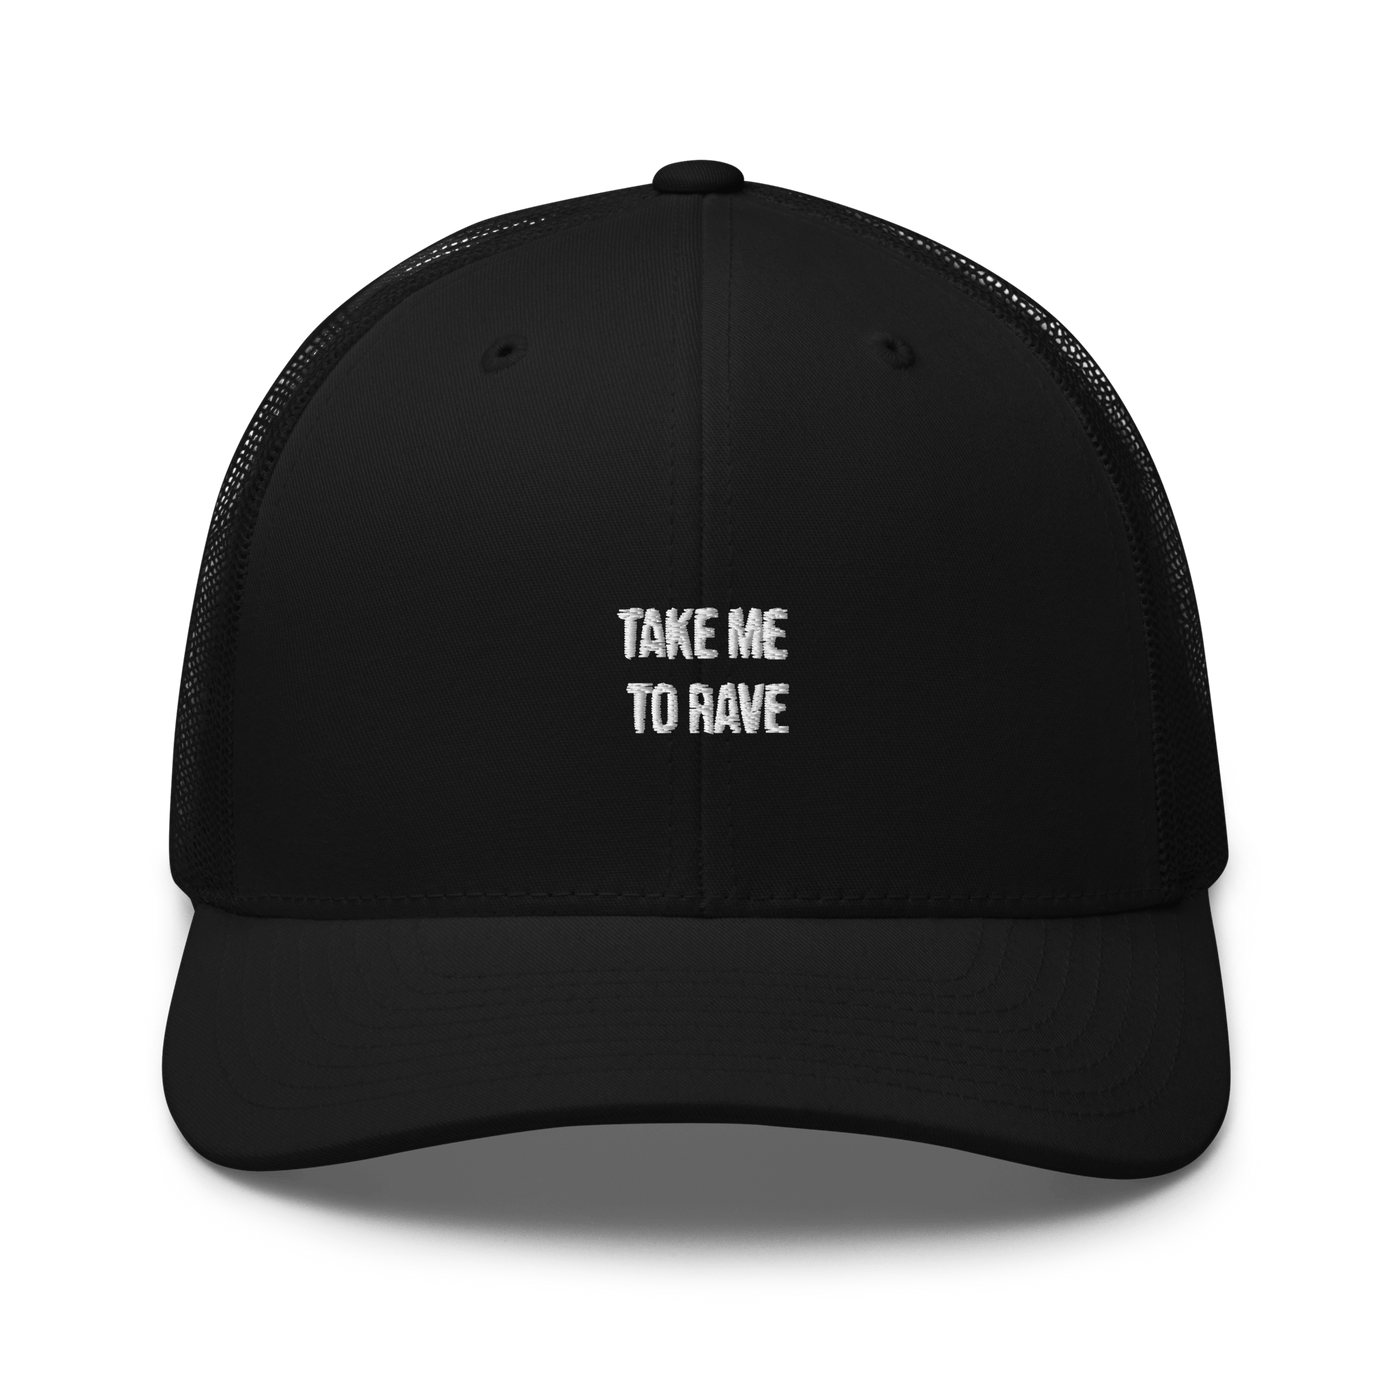 Take me to rave Trucker Cap - Black - - Just Another Cap Store